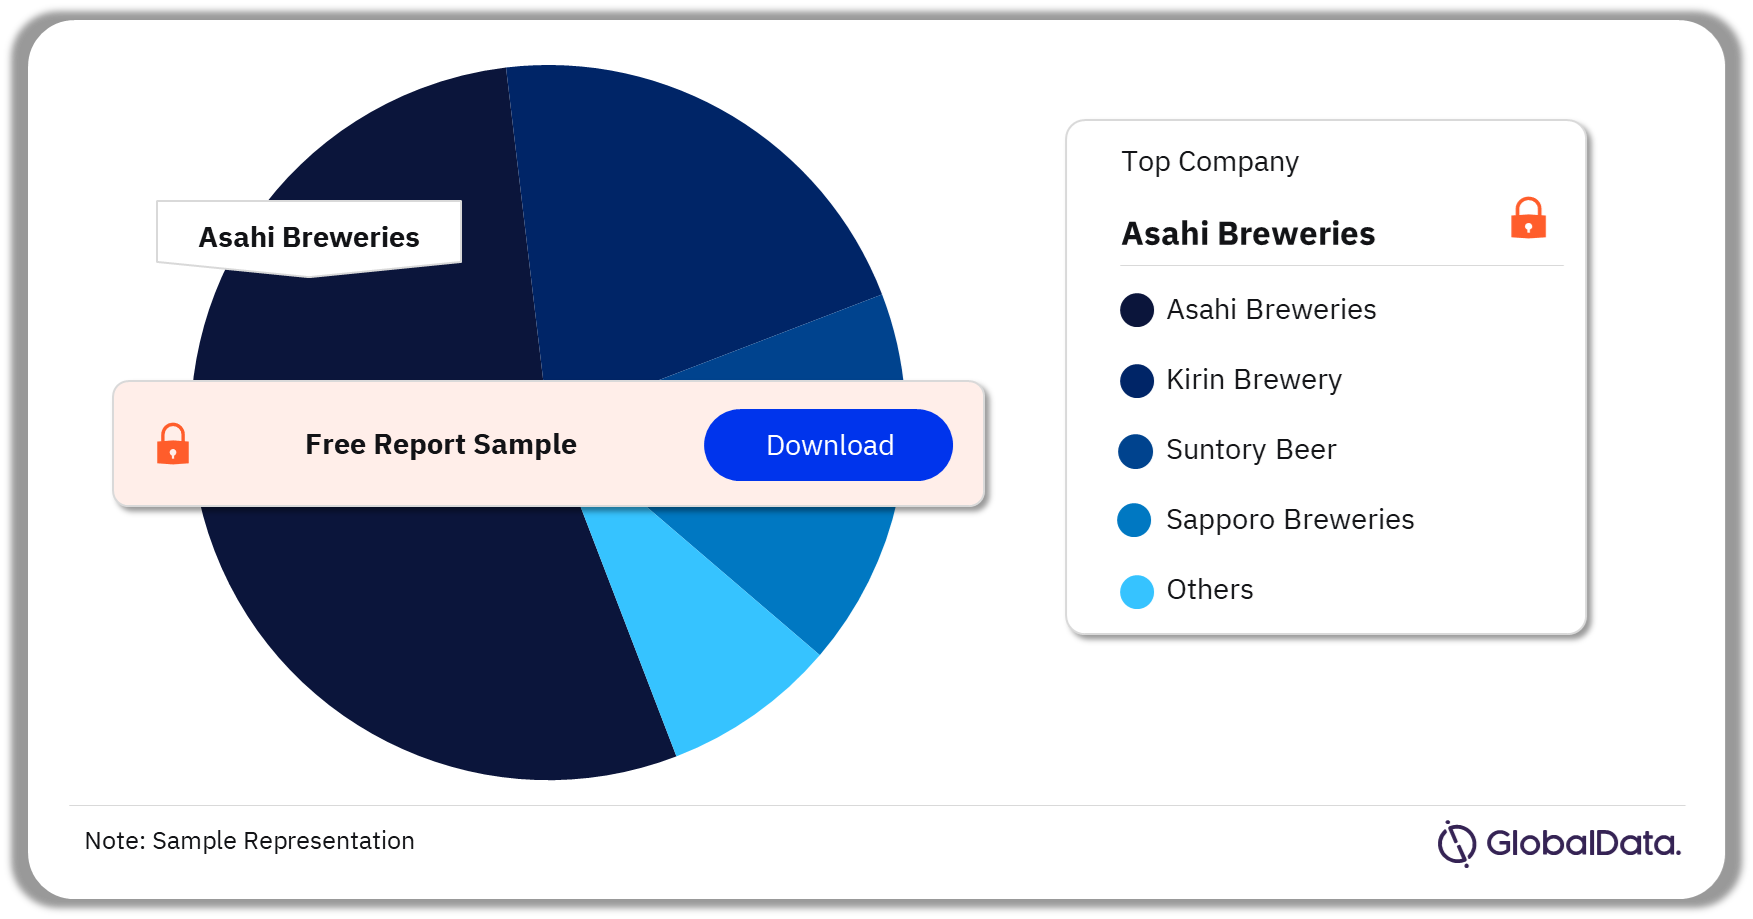 Japan Beer and Cider Market Analysis by Companies, 2022 (%)